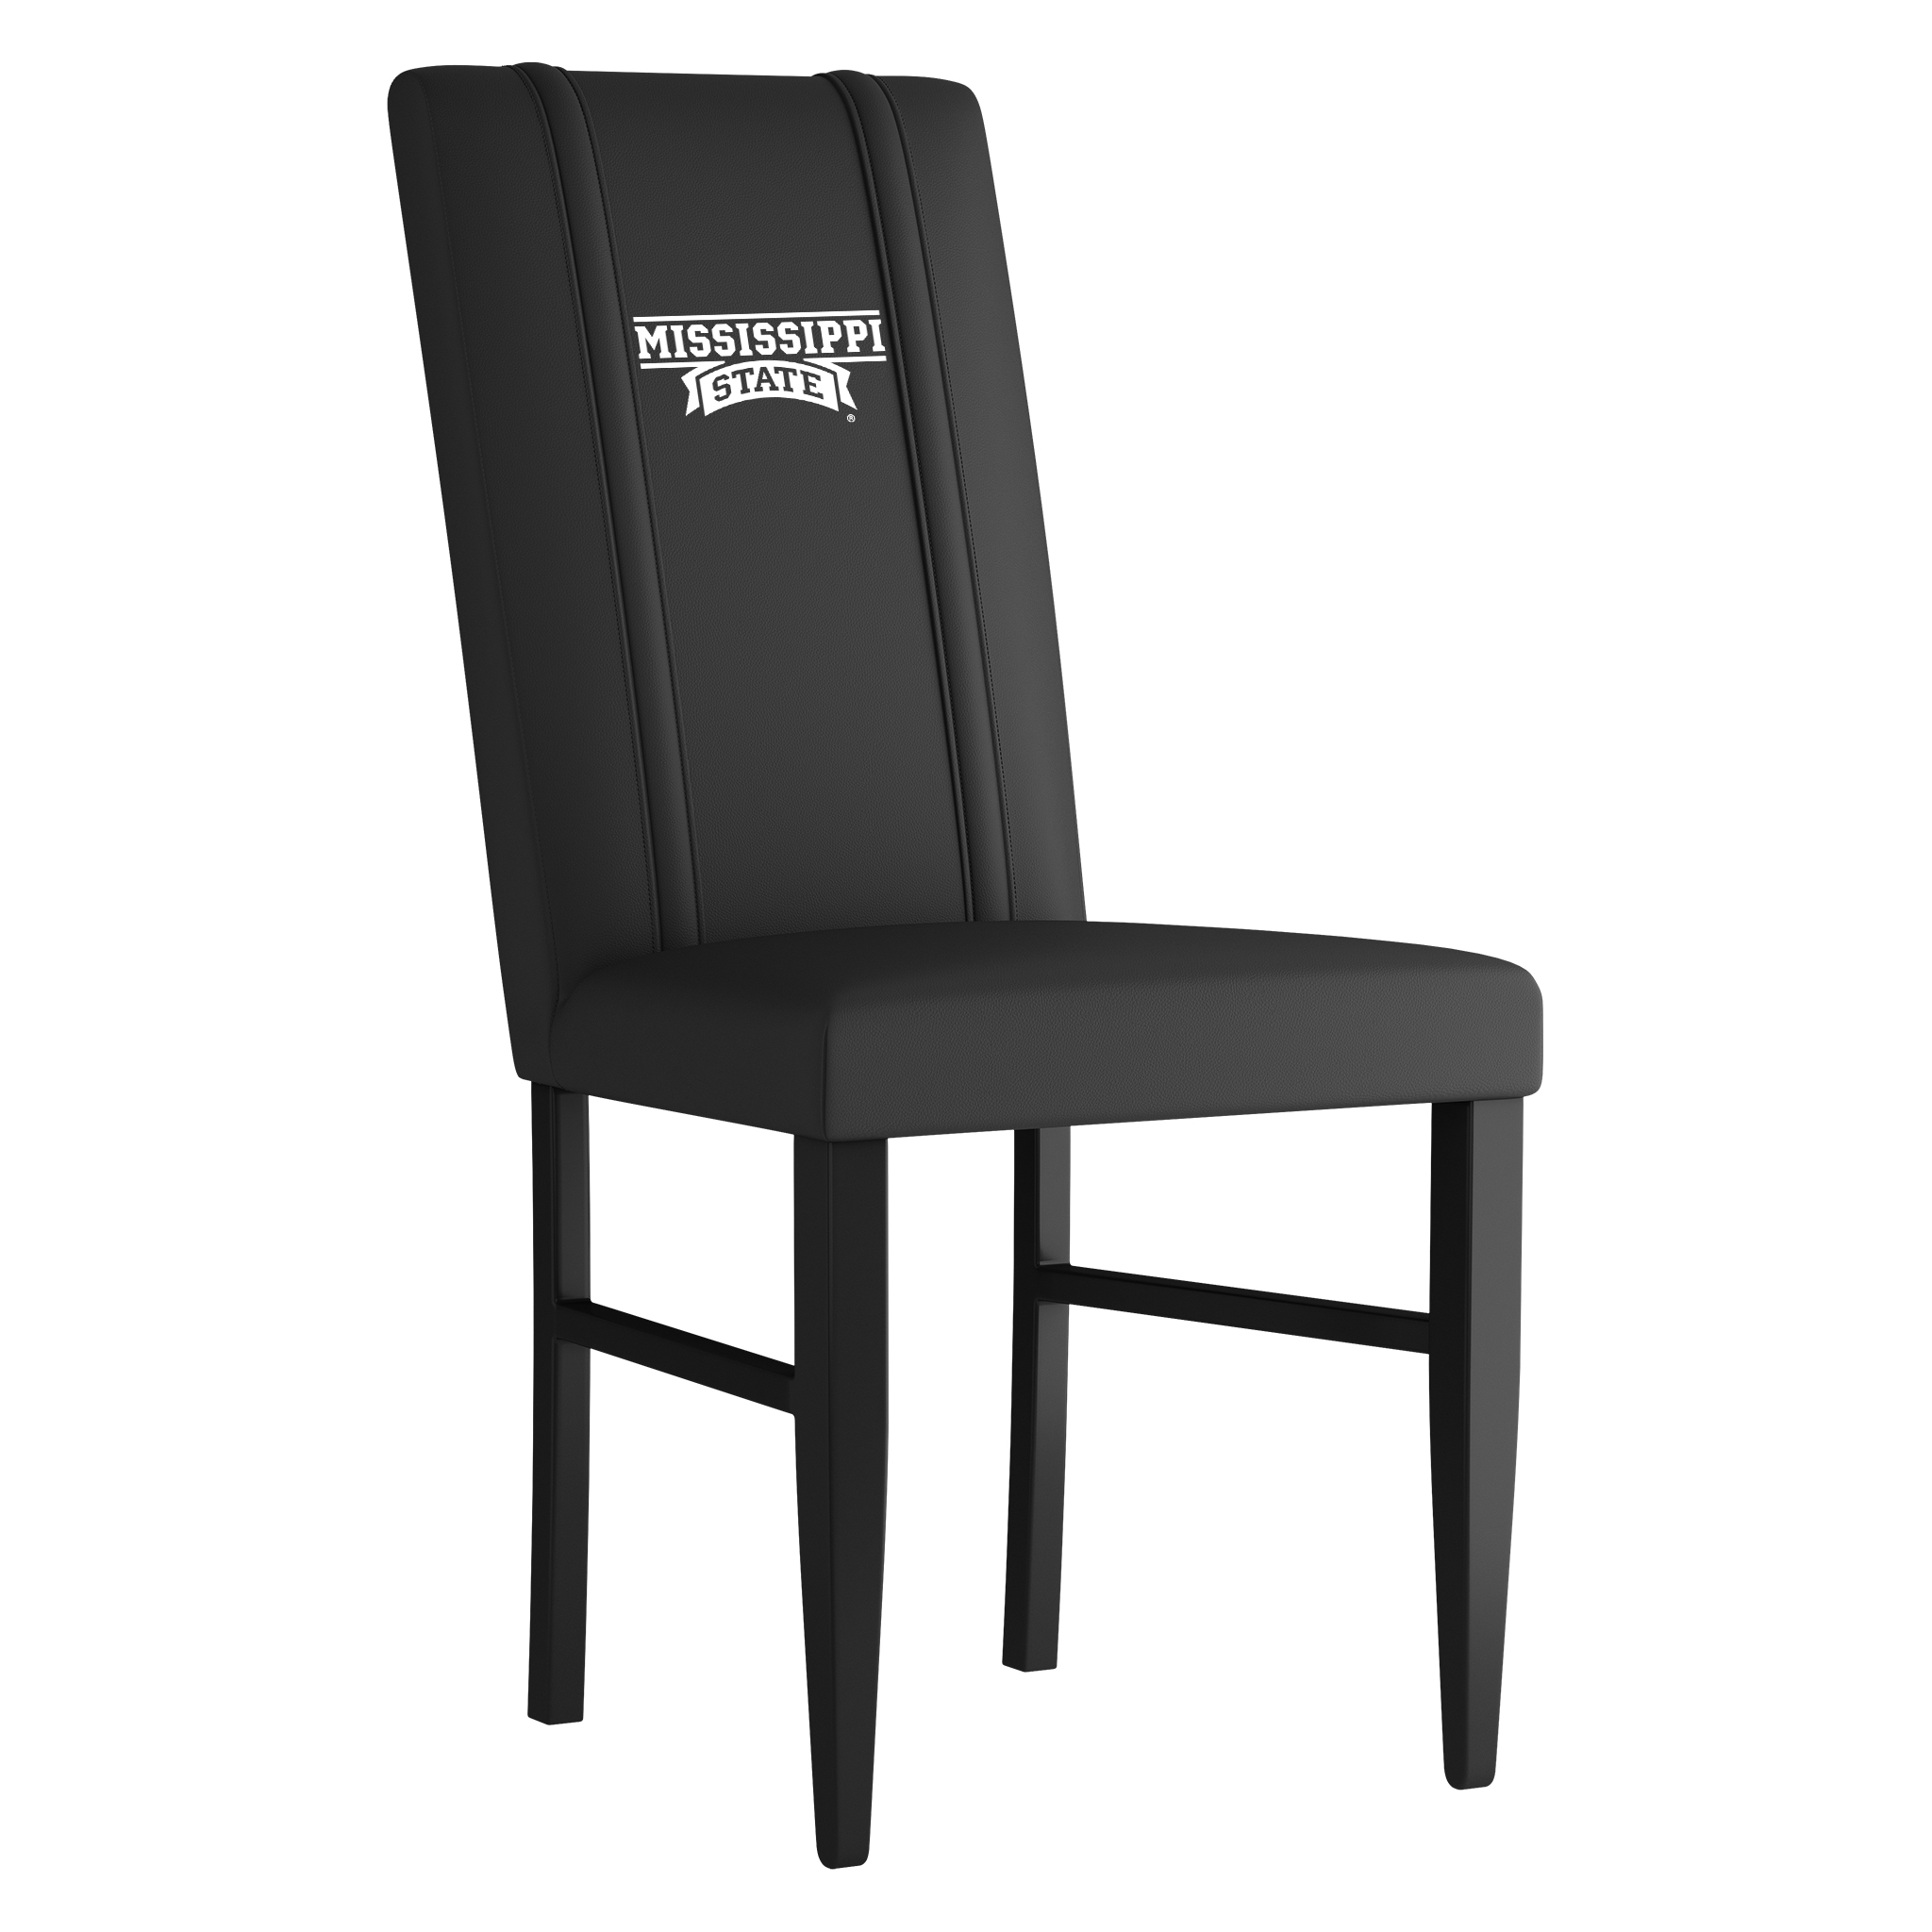 Mississippi State Side Chair 2000 With Mississippi State Alternate